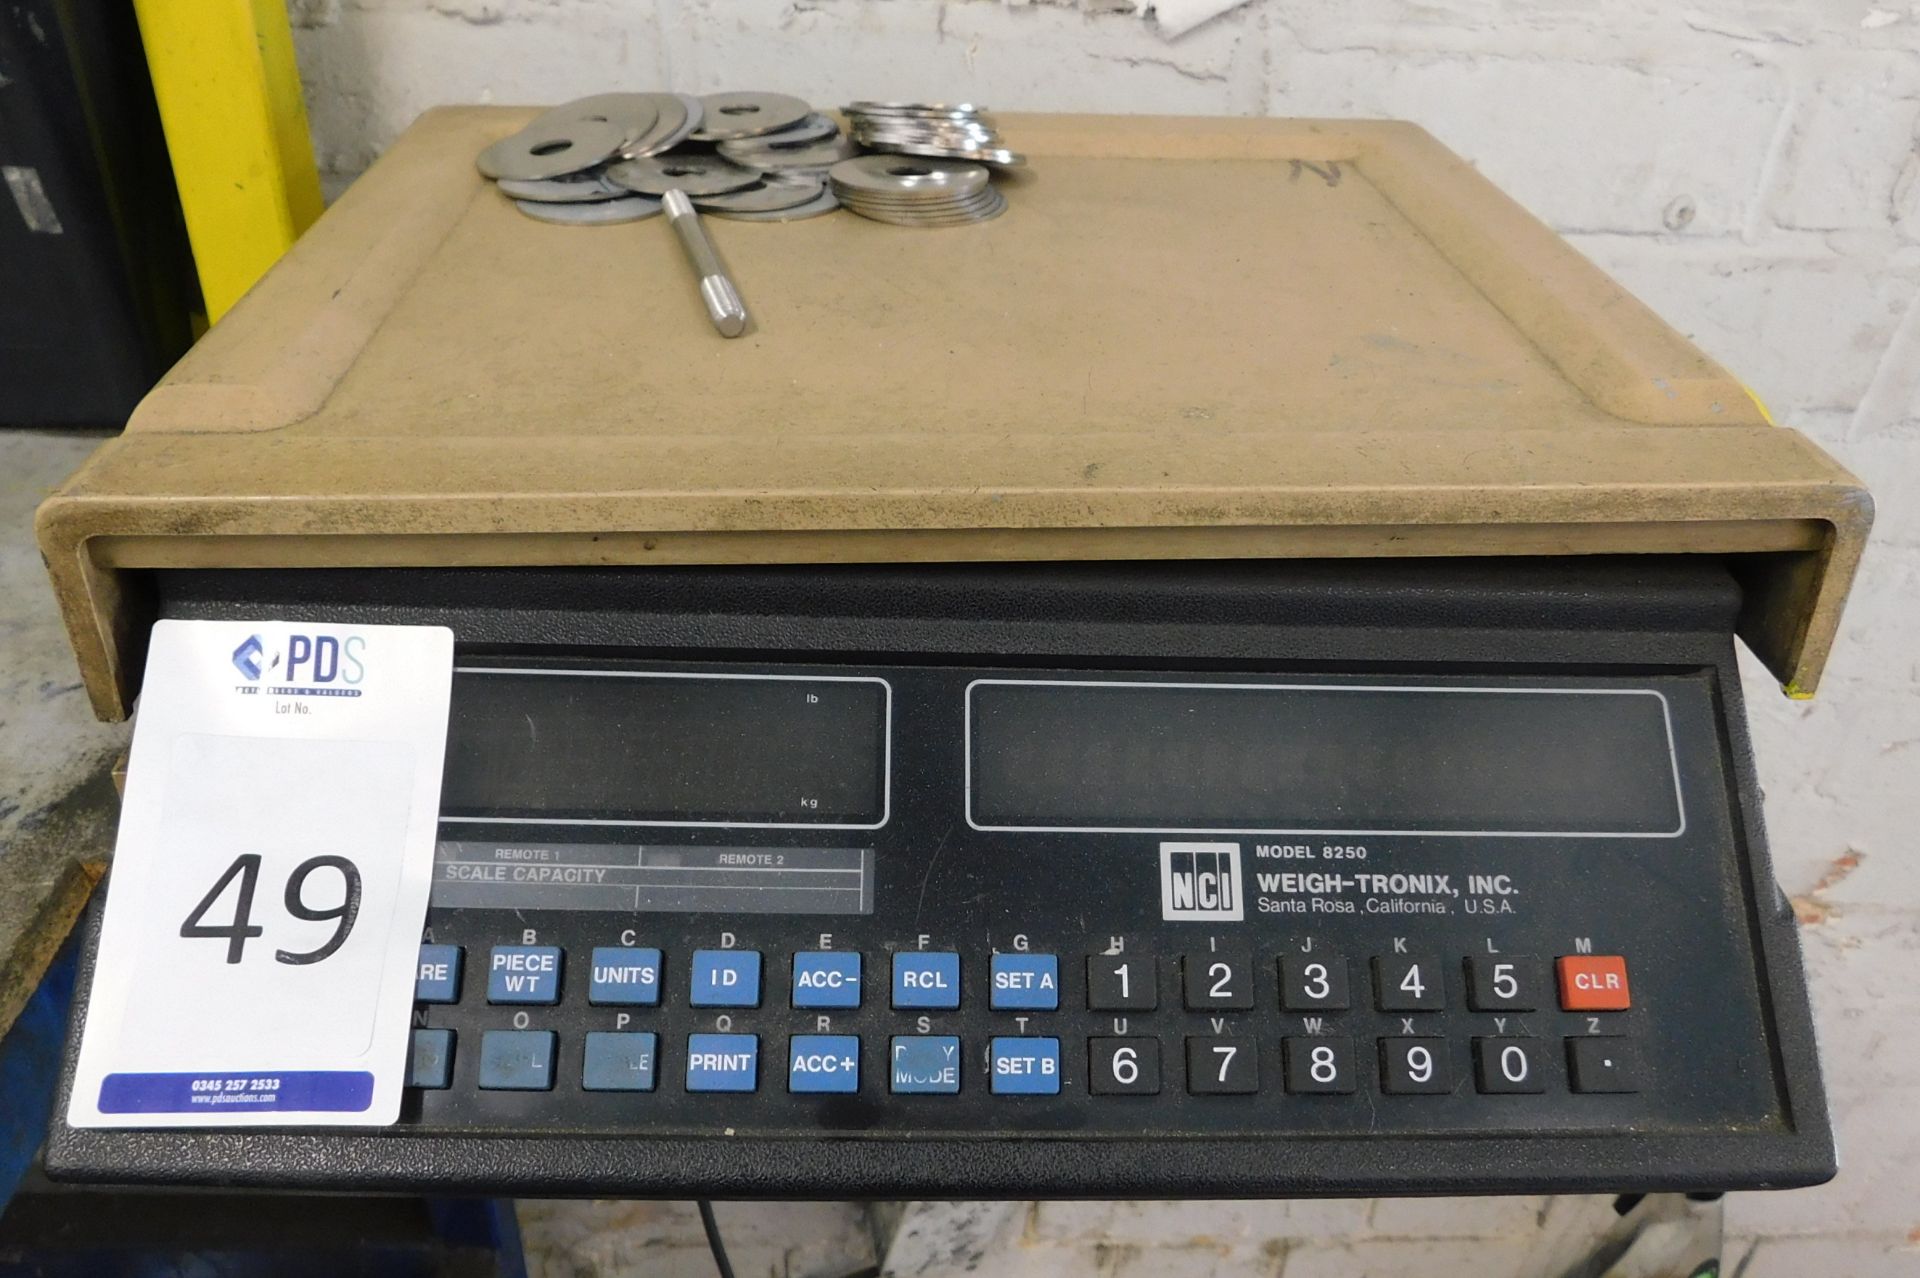 Weigh-Tronix NCI Model 8250 Digital Counting Scales (Location: Kettering - See General Notes for